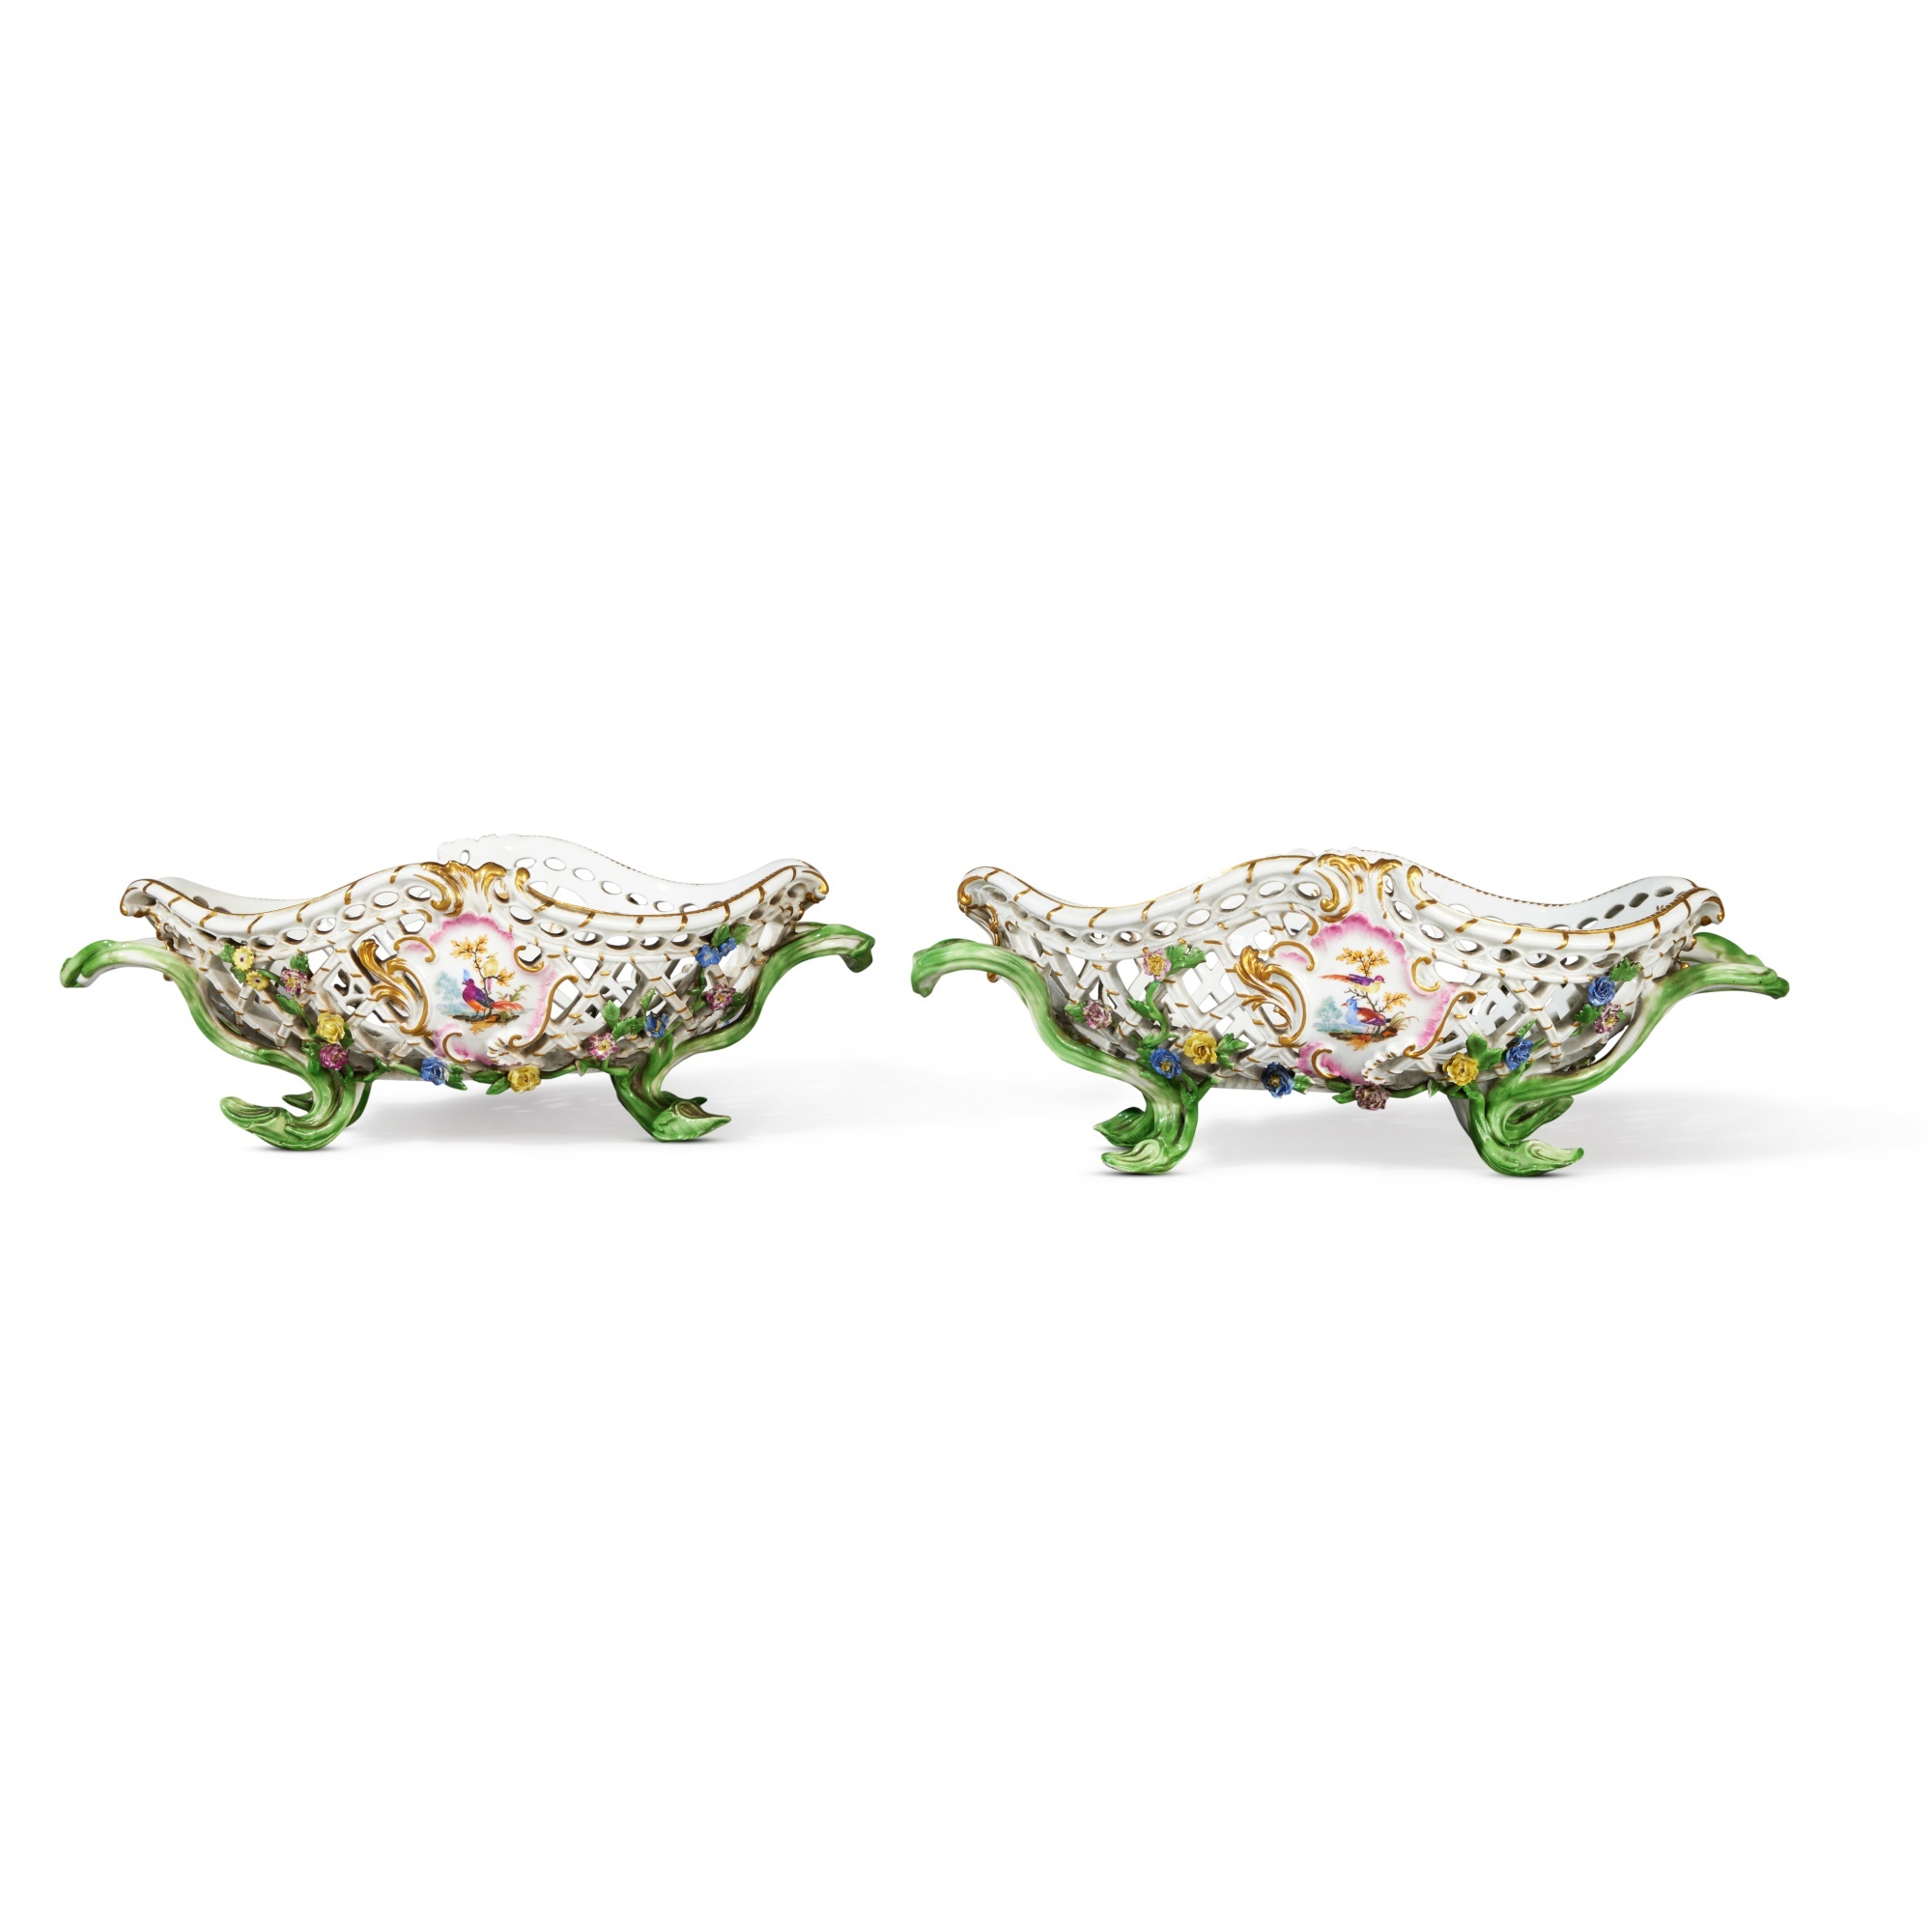 A Pair of Meissen Reticulated Footed Baskets, Circa 1770